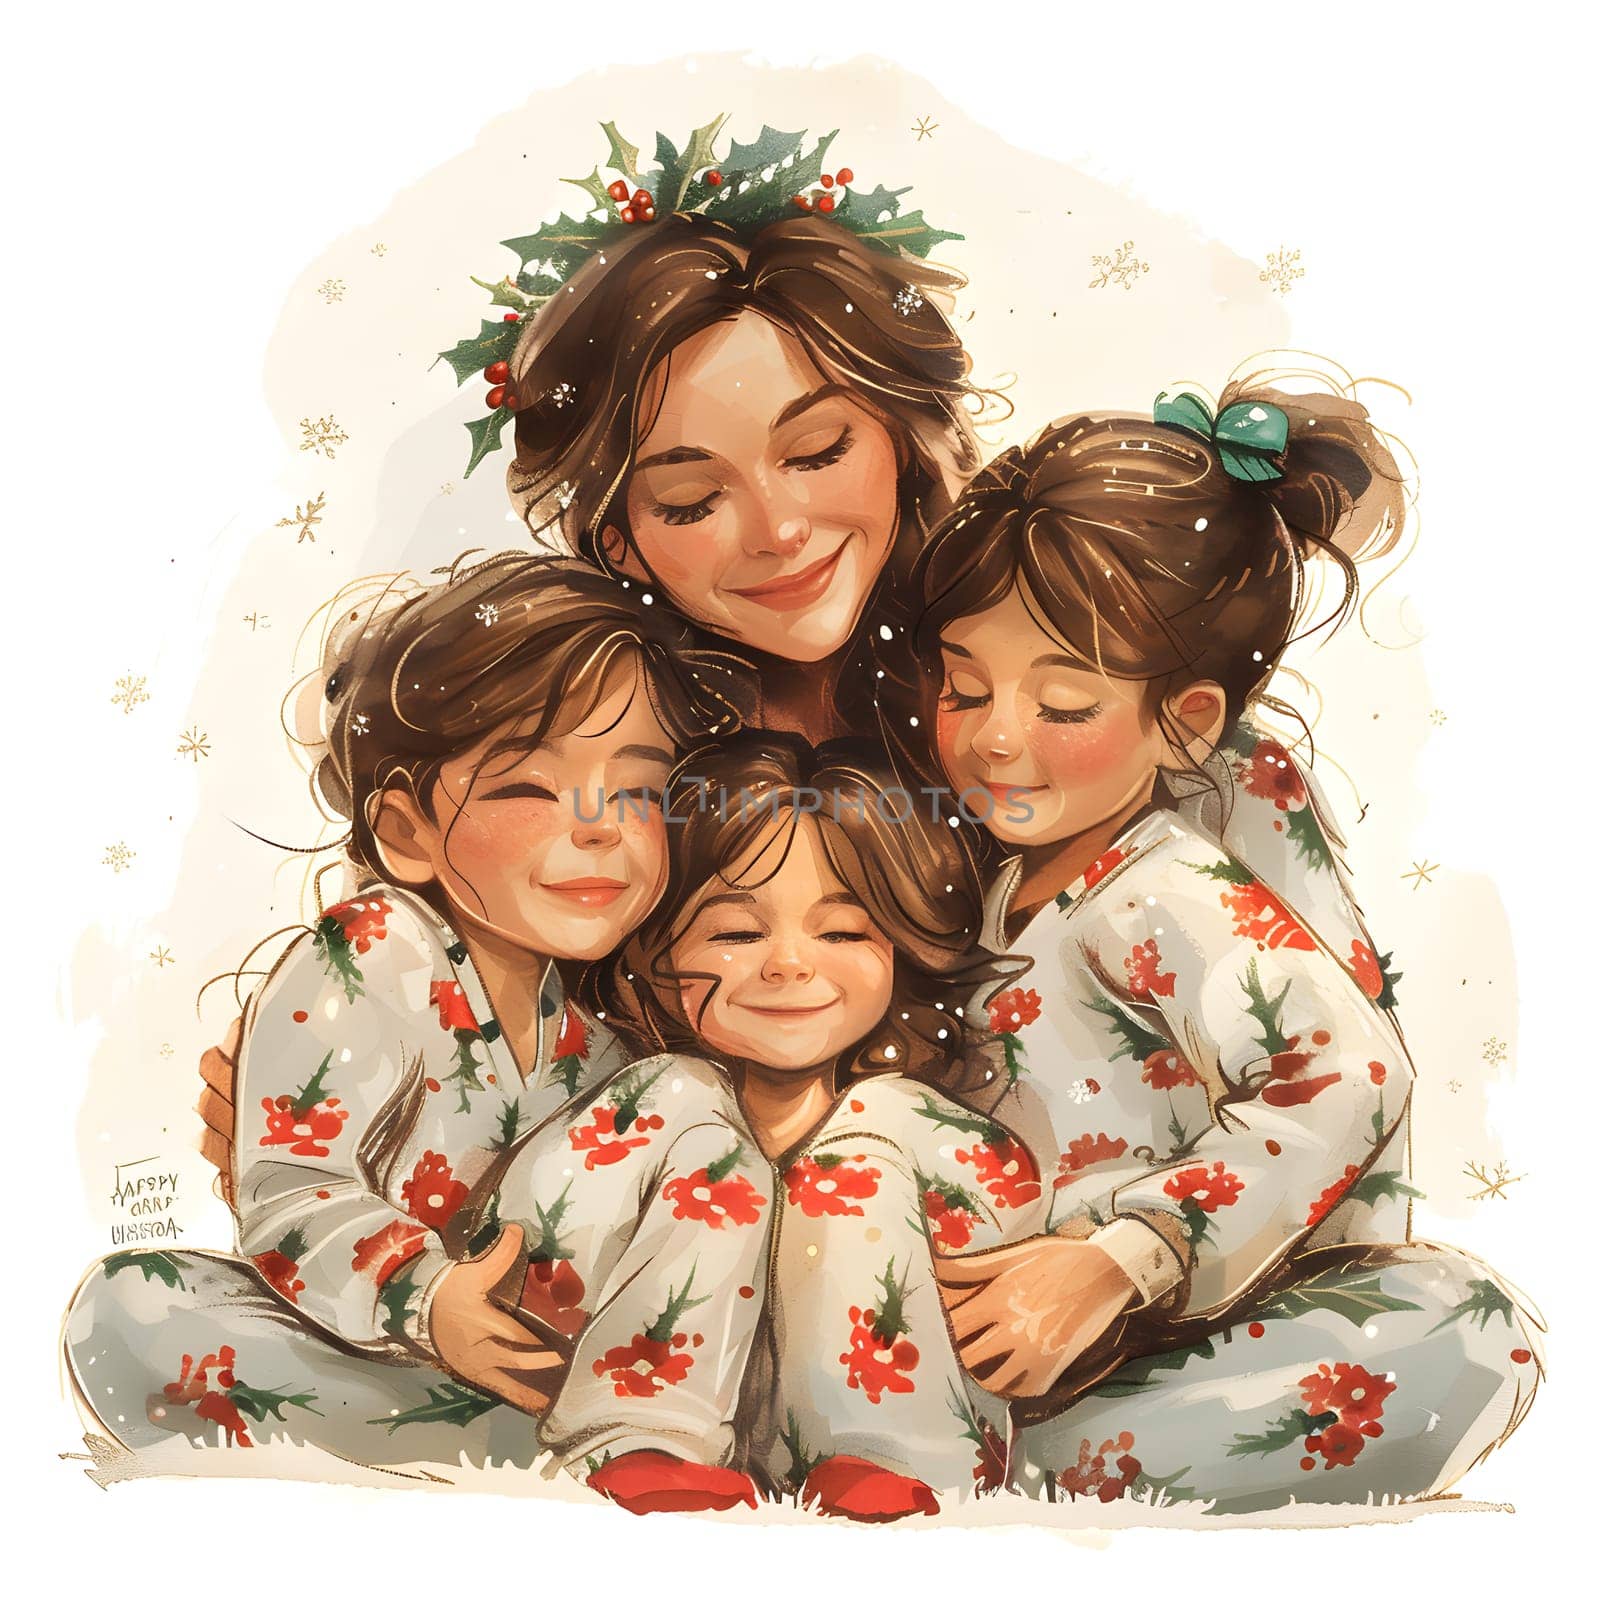 A happy woman in vintage Christmas pajamas smiles while hugging three children by Nadtochiy